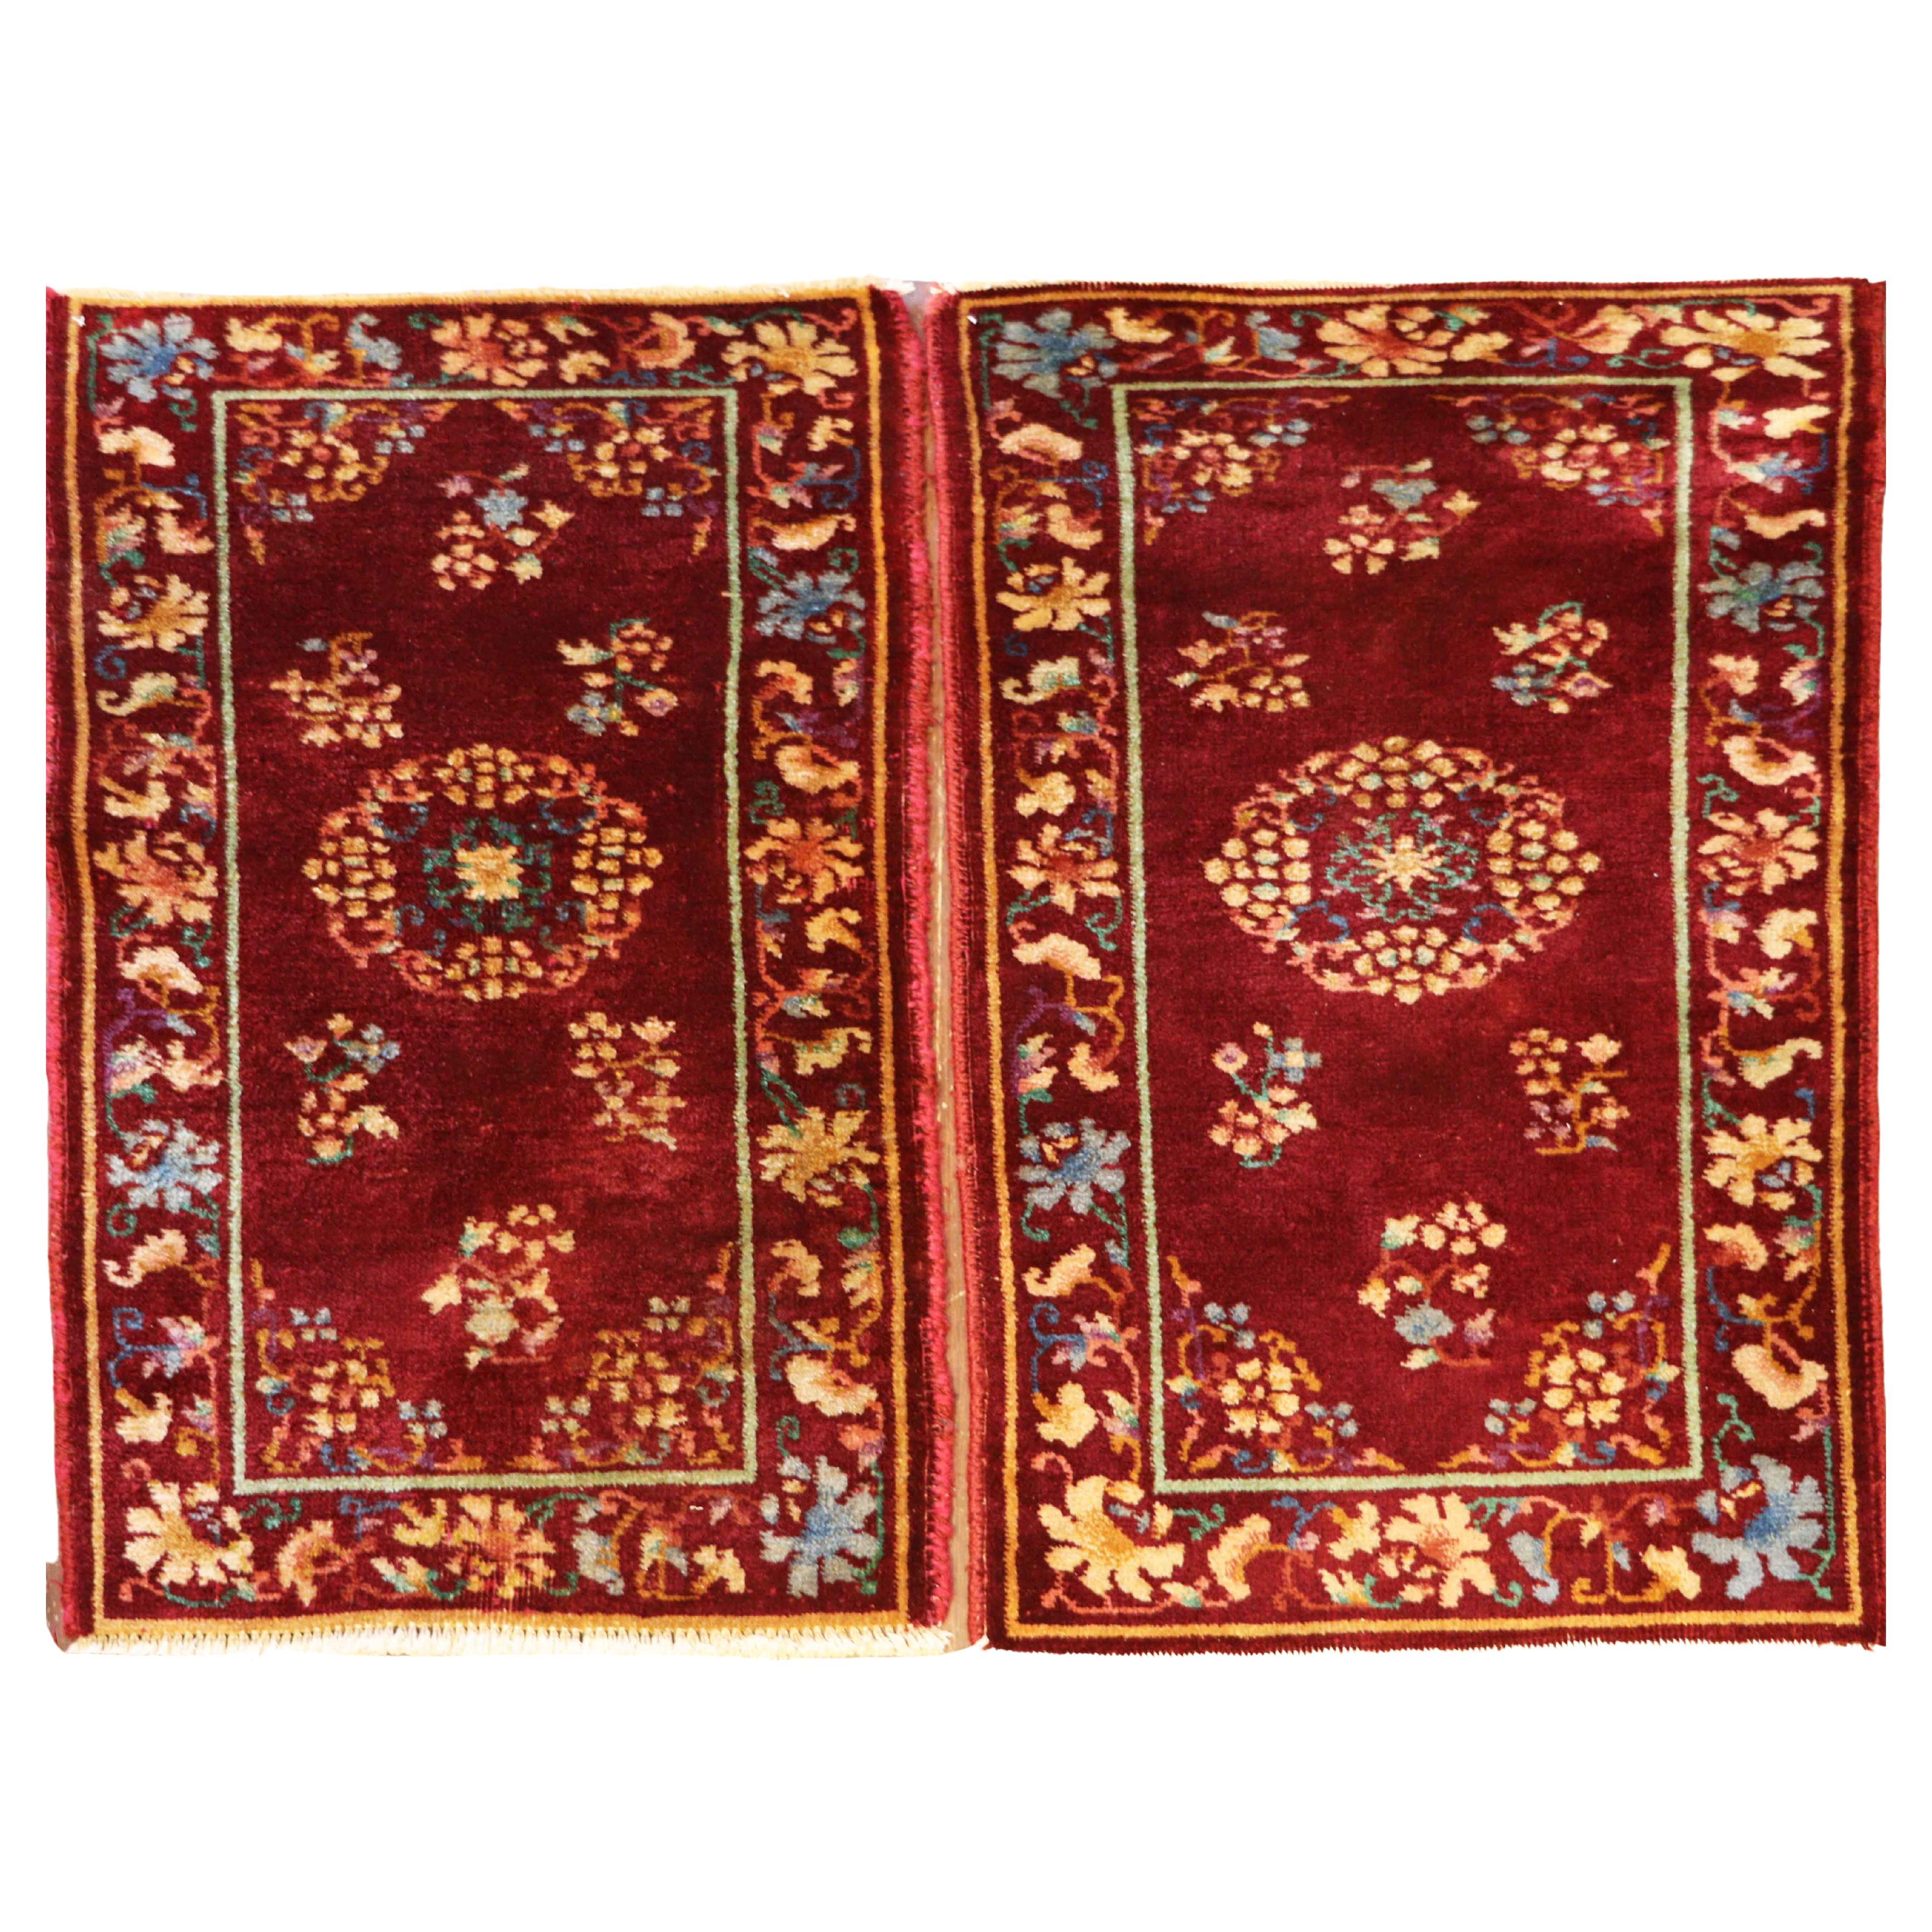 A Pair of Antique Art Deco Chinese Oriental Rug, 2' x 3'10" Each For Sale